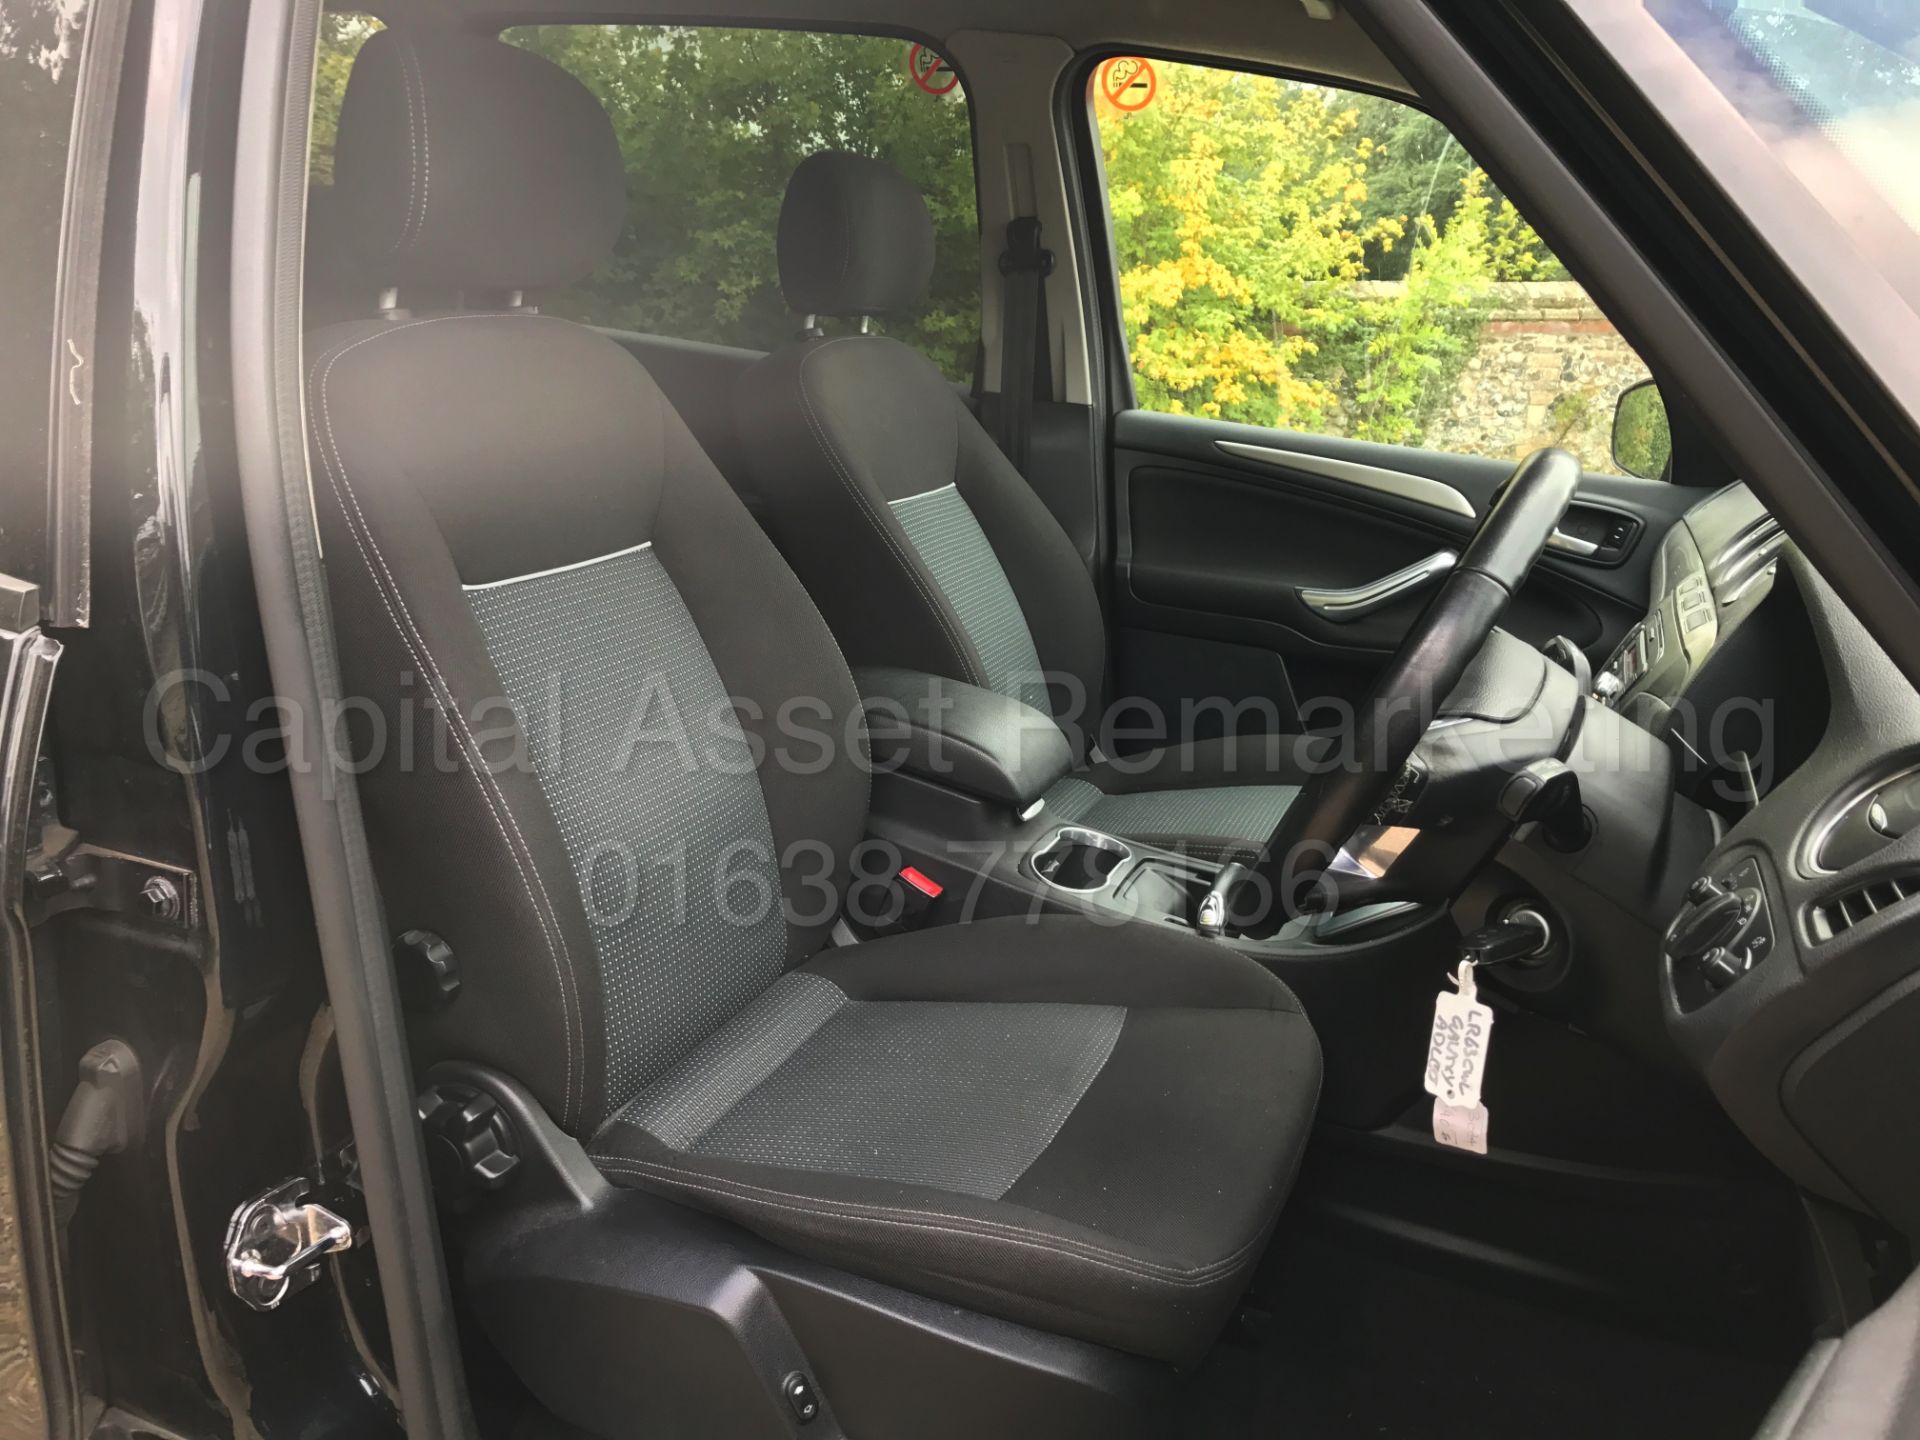 FORD GALAXY 'ZETEC' 7 SEATER MPV (2014 MODEL) '2.0 TDCI - 140 BHP - POWER SHIFT' (1 OWNER FROM NEW) - Image 18 of 27